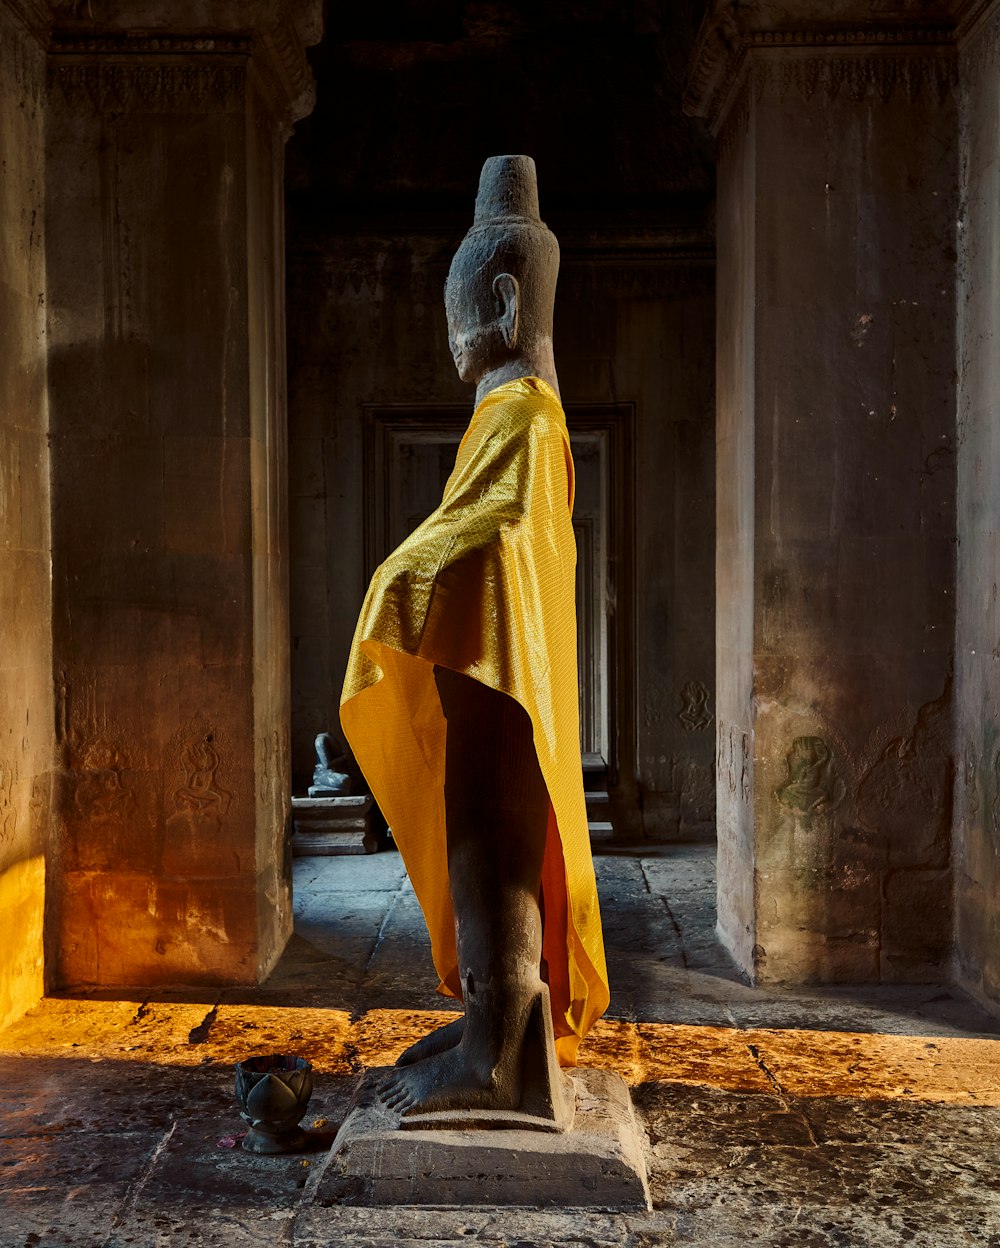 a statue of a woman in a yellow dress